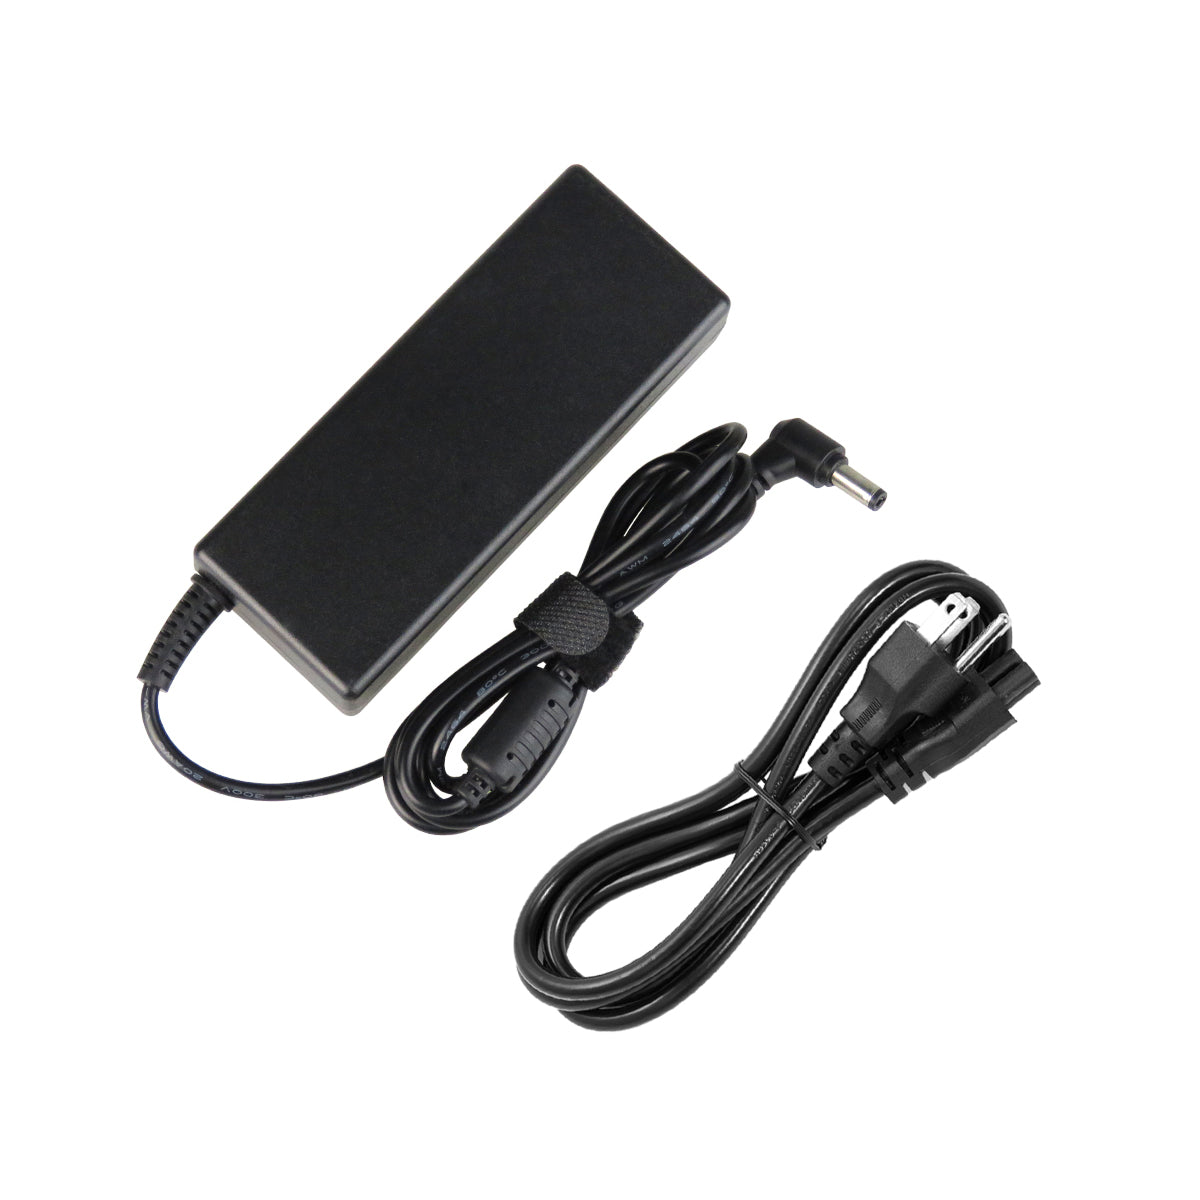 AC Adapter Charger for ASUS F7L Notebook.